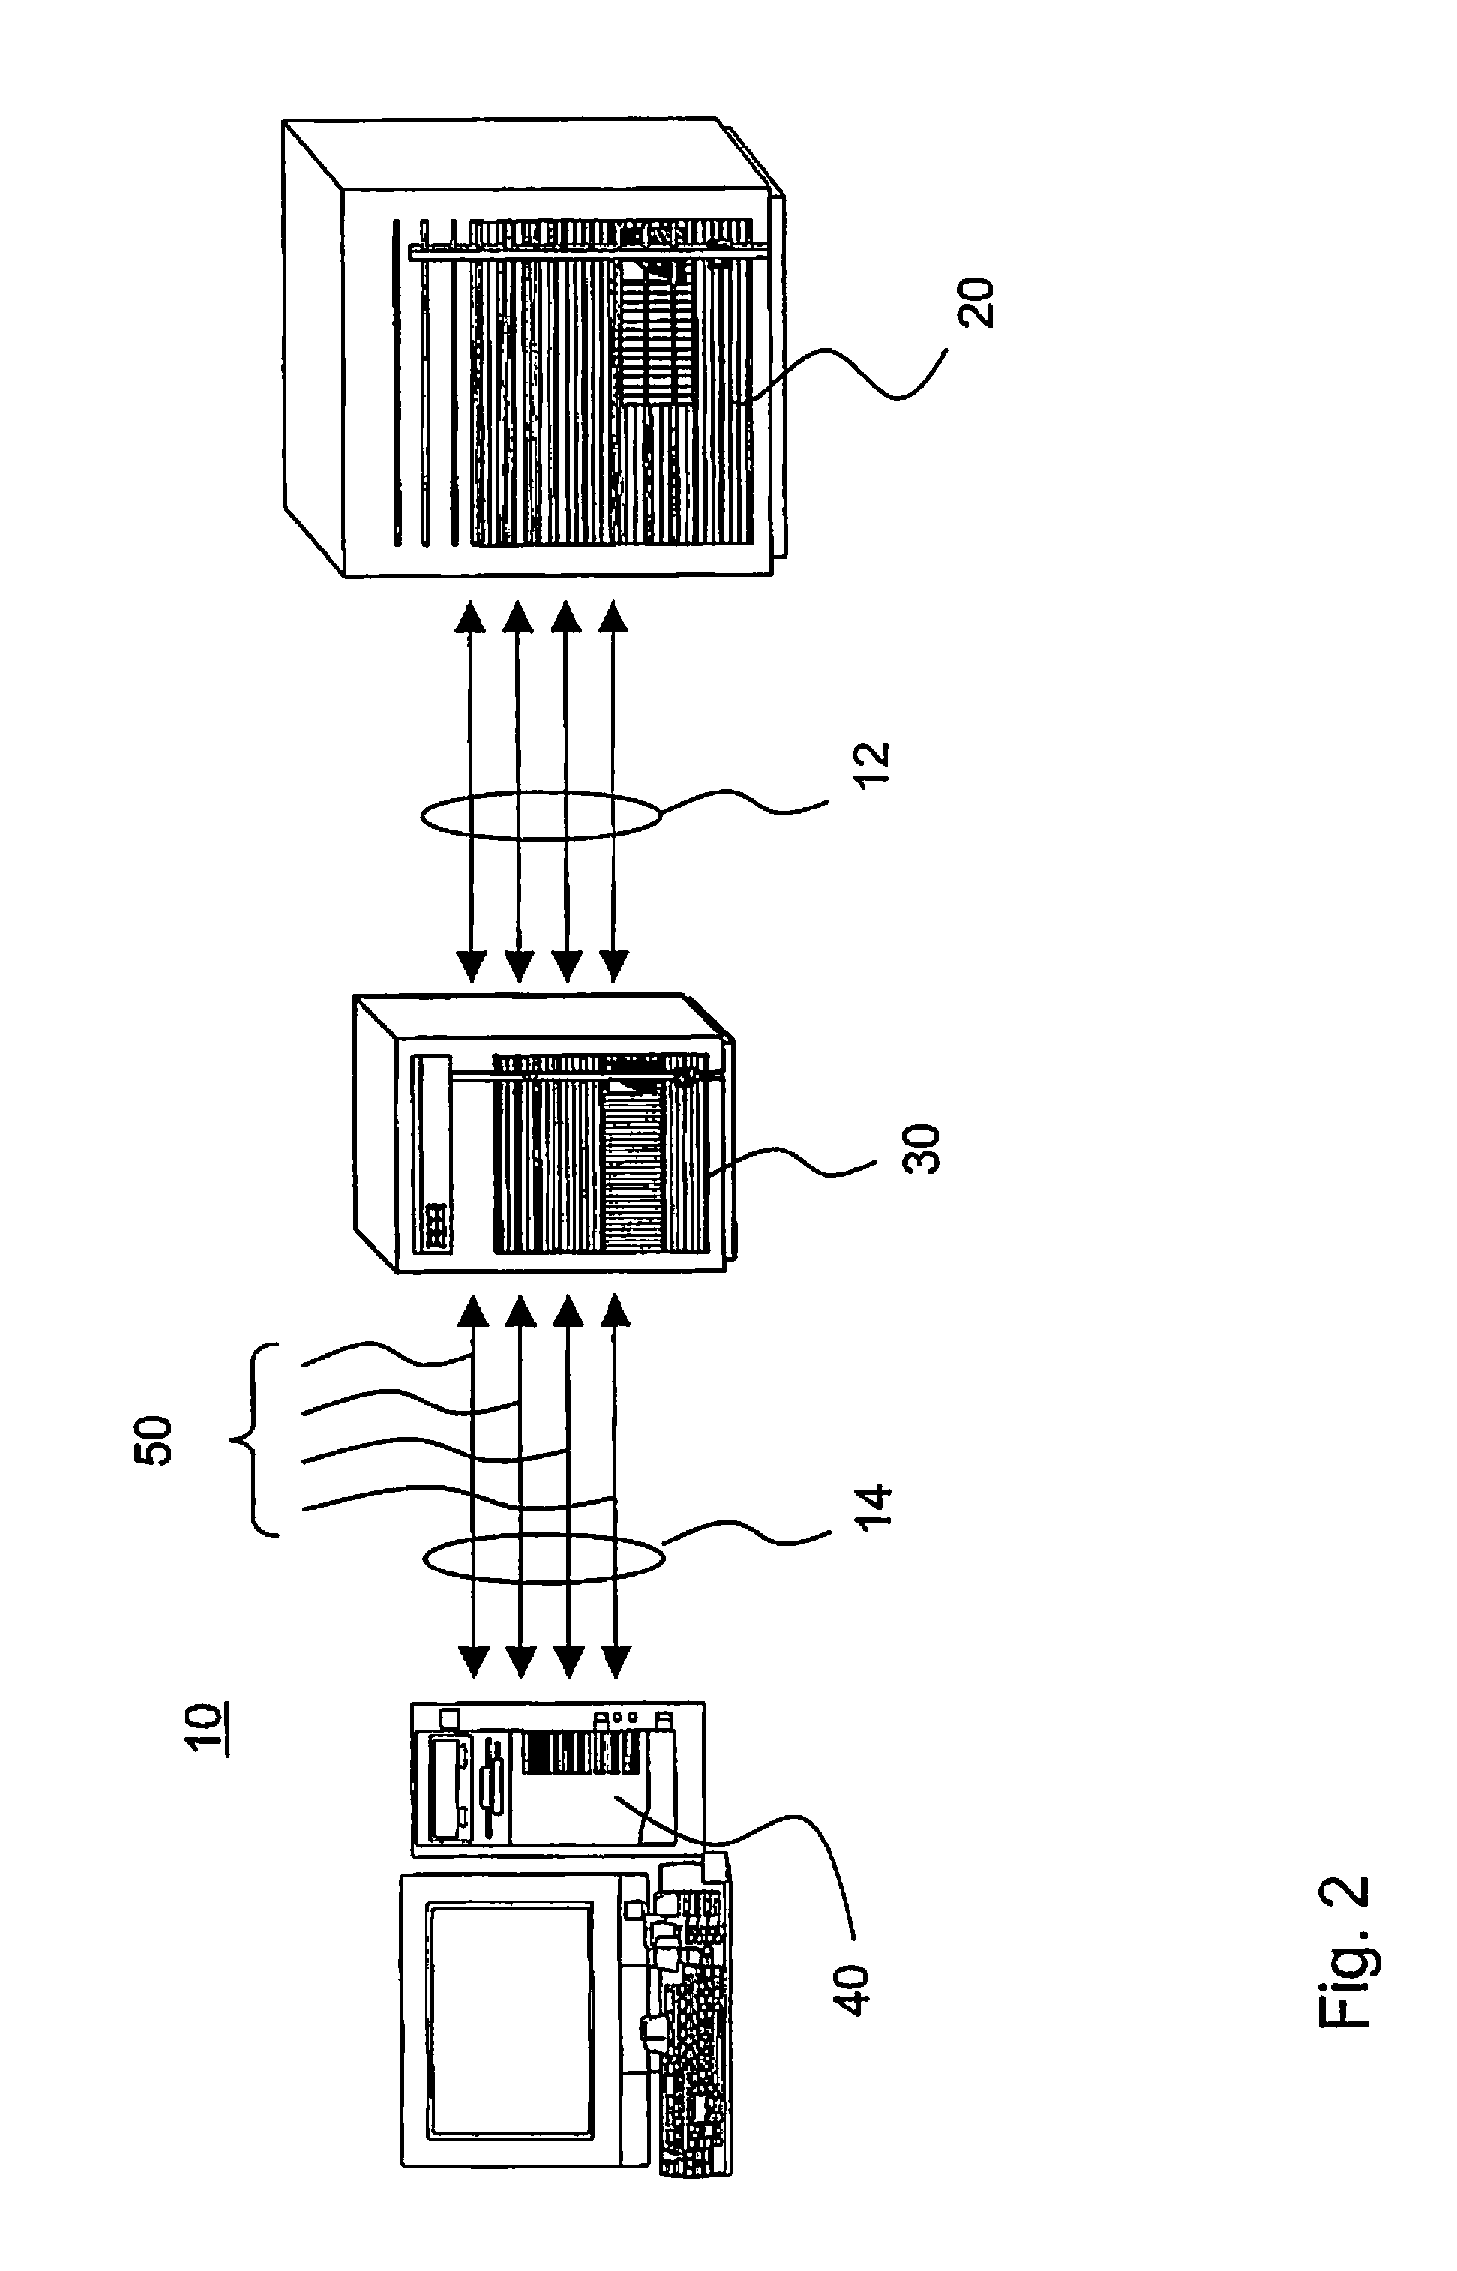 Object transfer control in a communications network